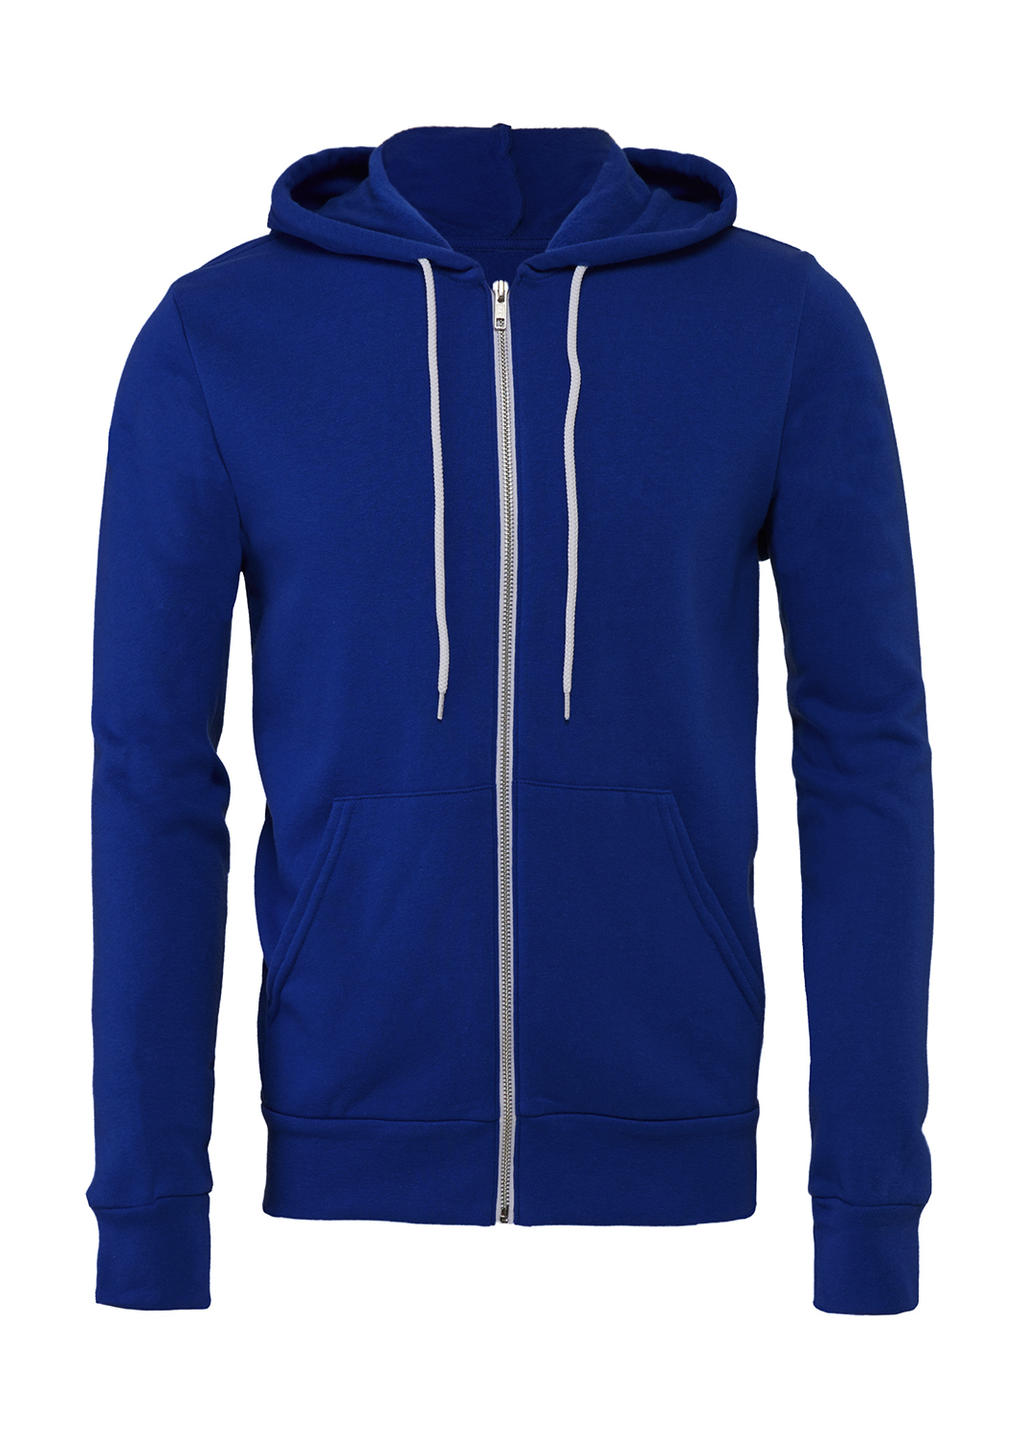  Unisex Poly-Cotton Full Zip Hoodie in Farbe True Royal